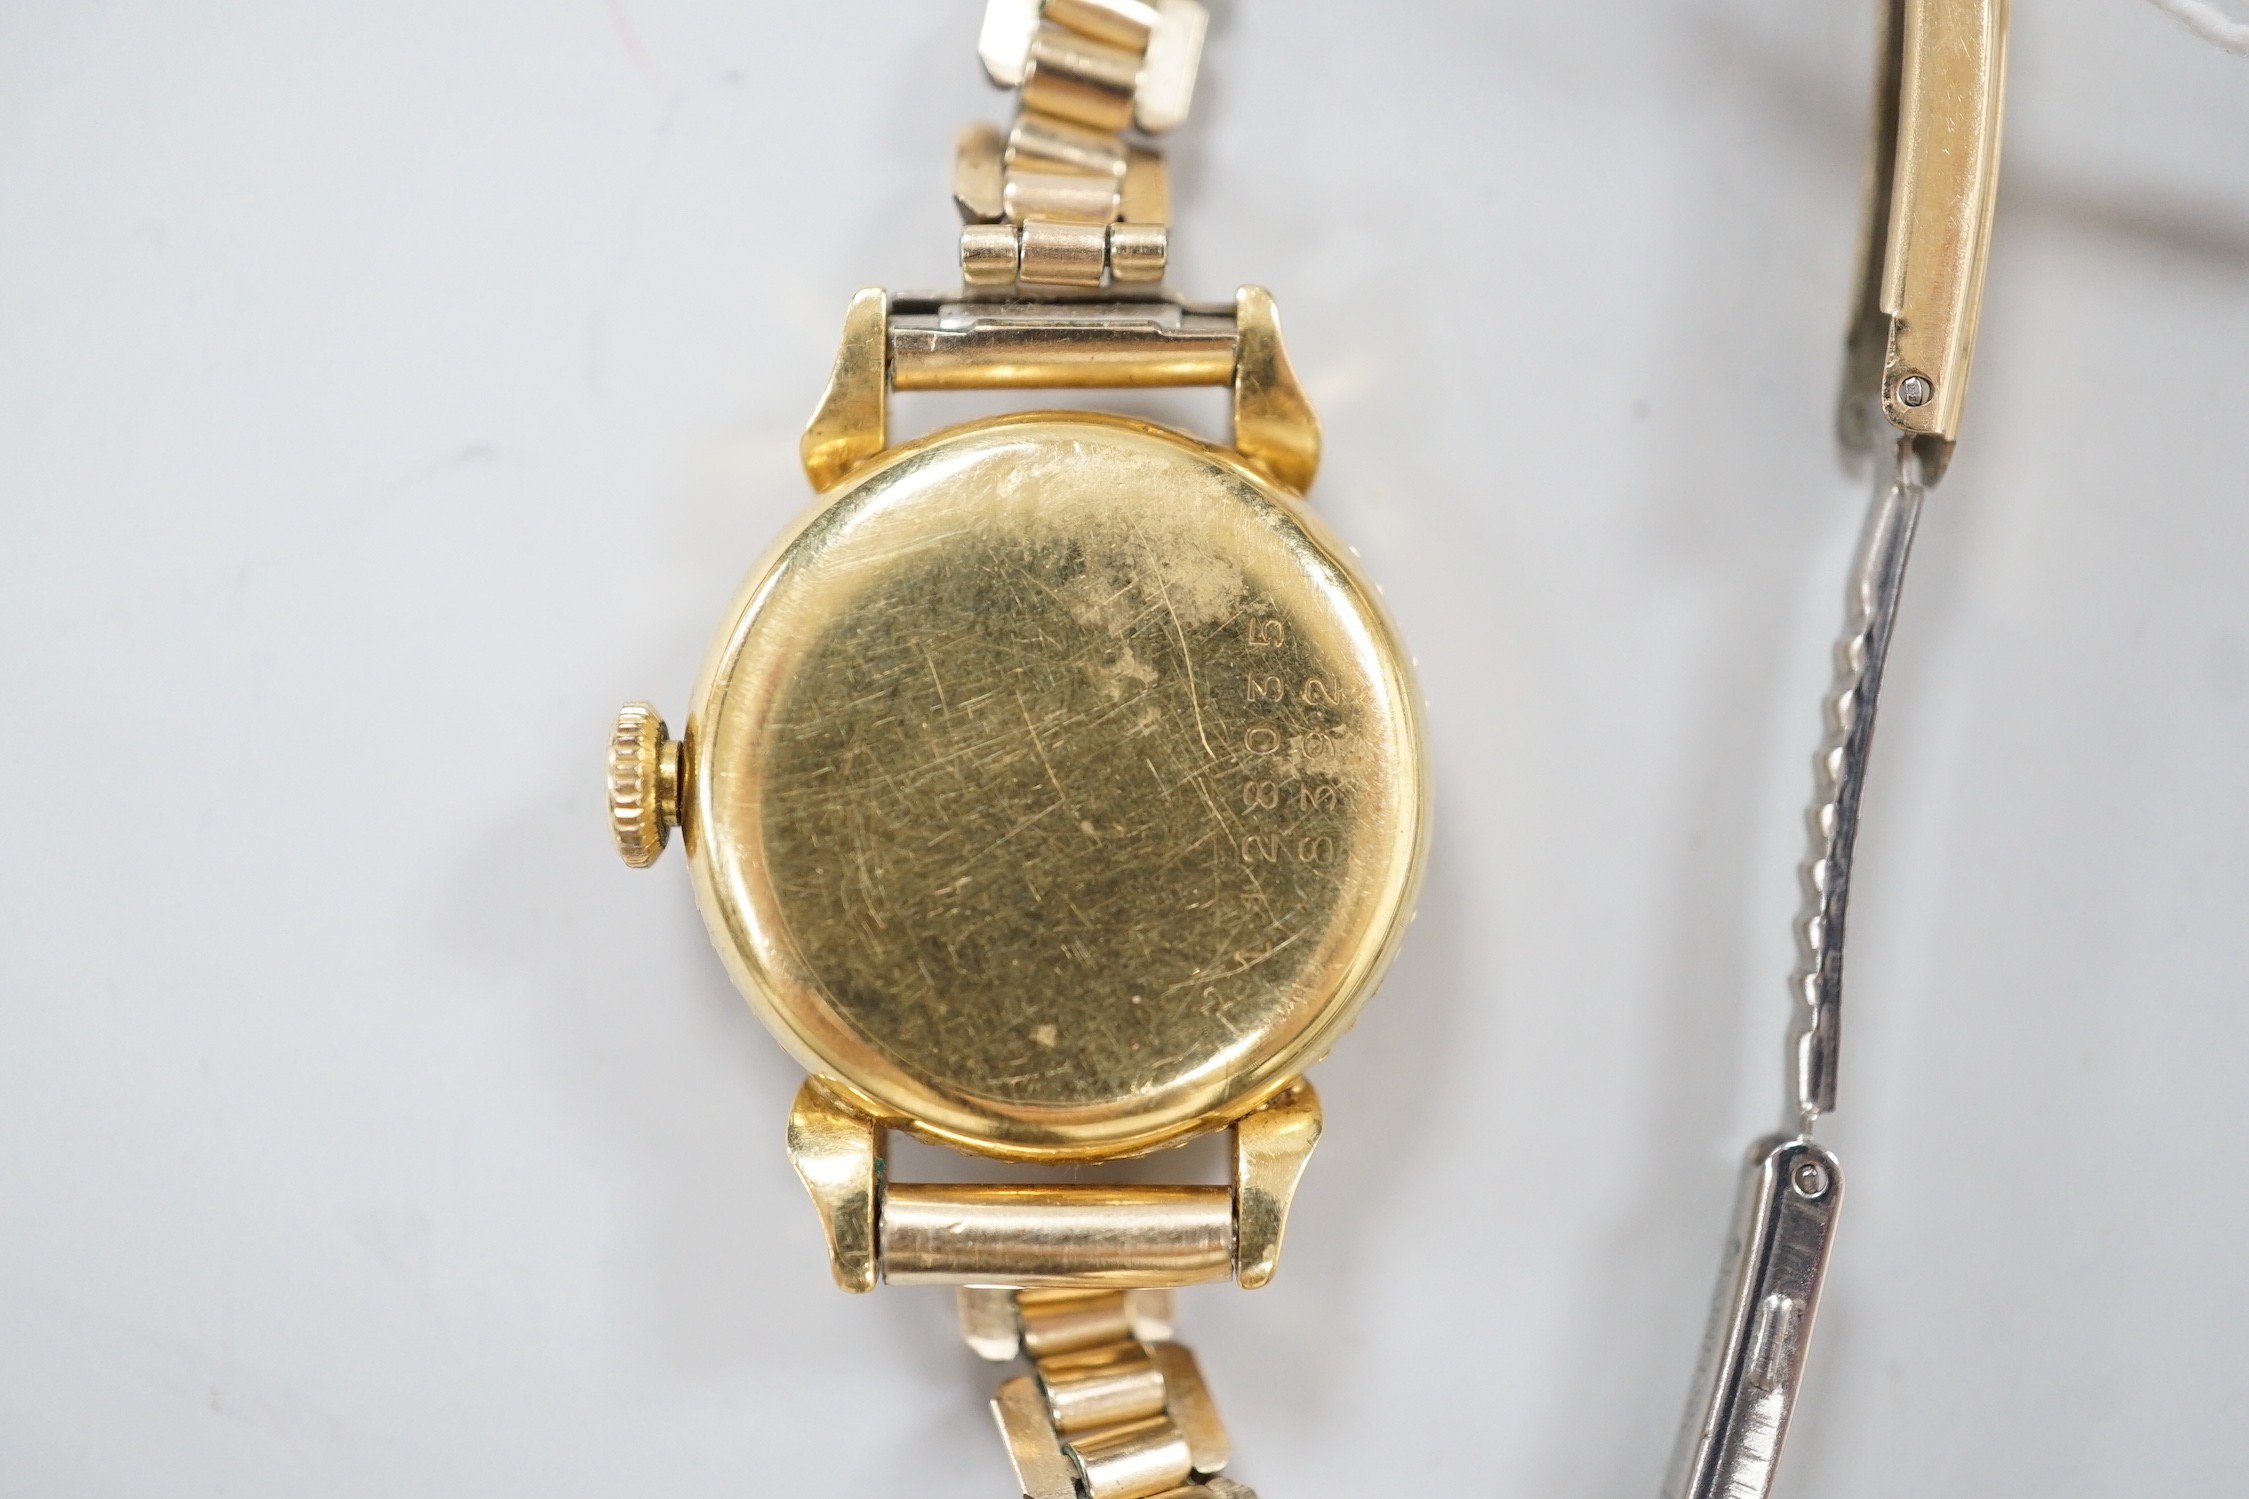 A lady's 750 yellow metal Universal manual wind wrist watch, on associated gold plated bracelet.